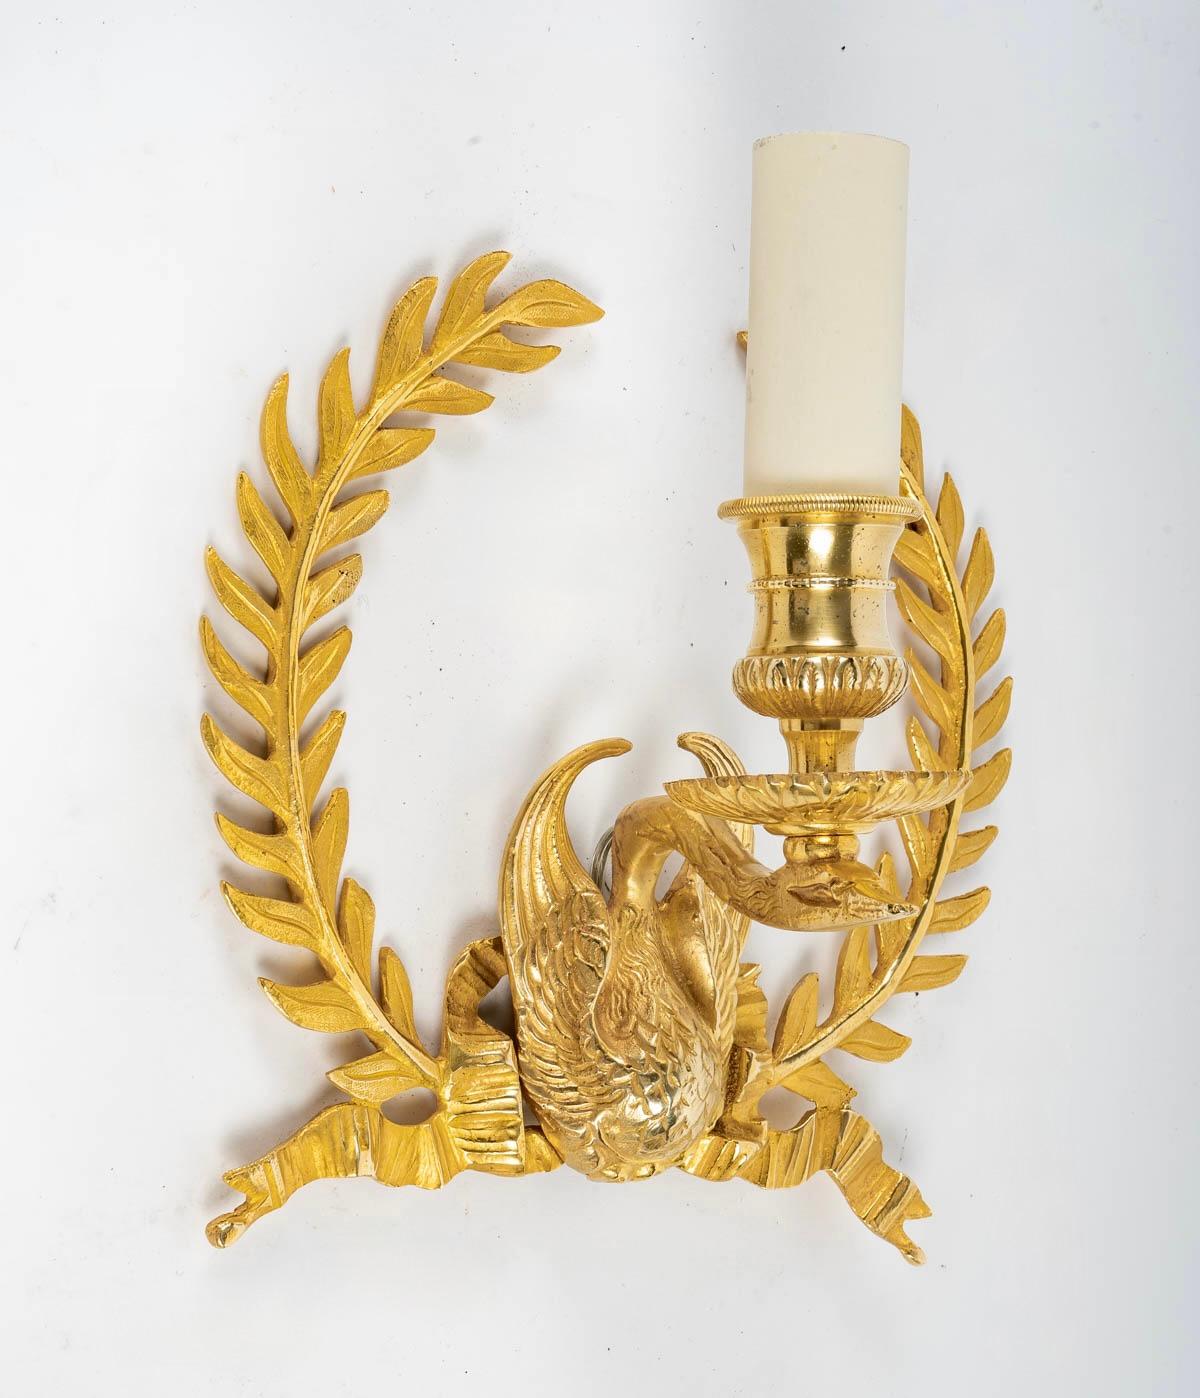 Composed of two laurel leaves in the form of a crown gathering on the lower part and decorated with a swan supporting the arm of light located on the head of this one.
The arm of light is dressed with luminous candles.

